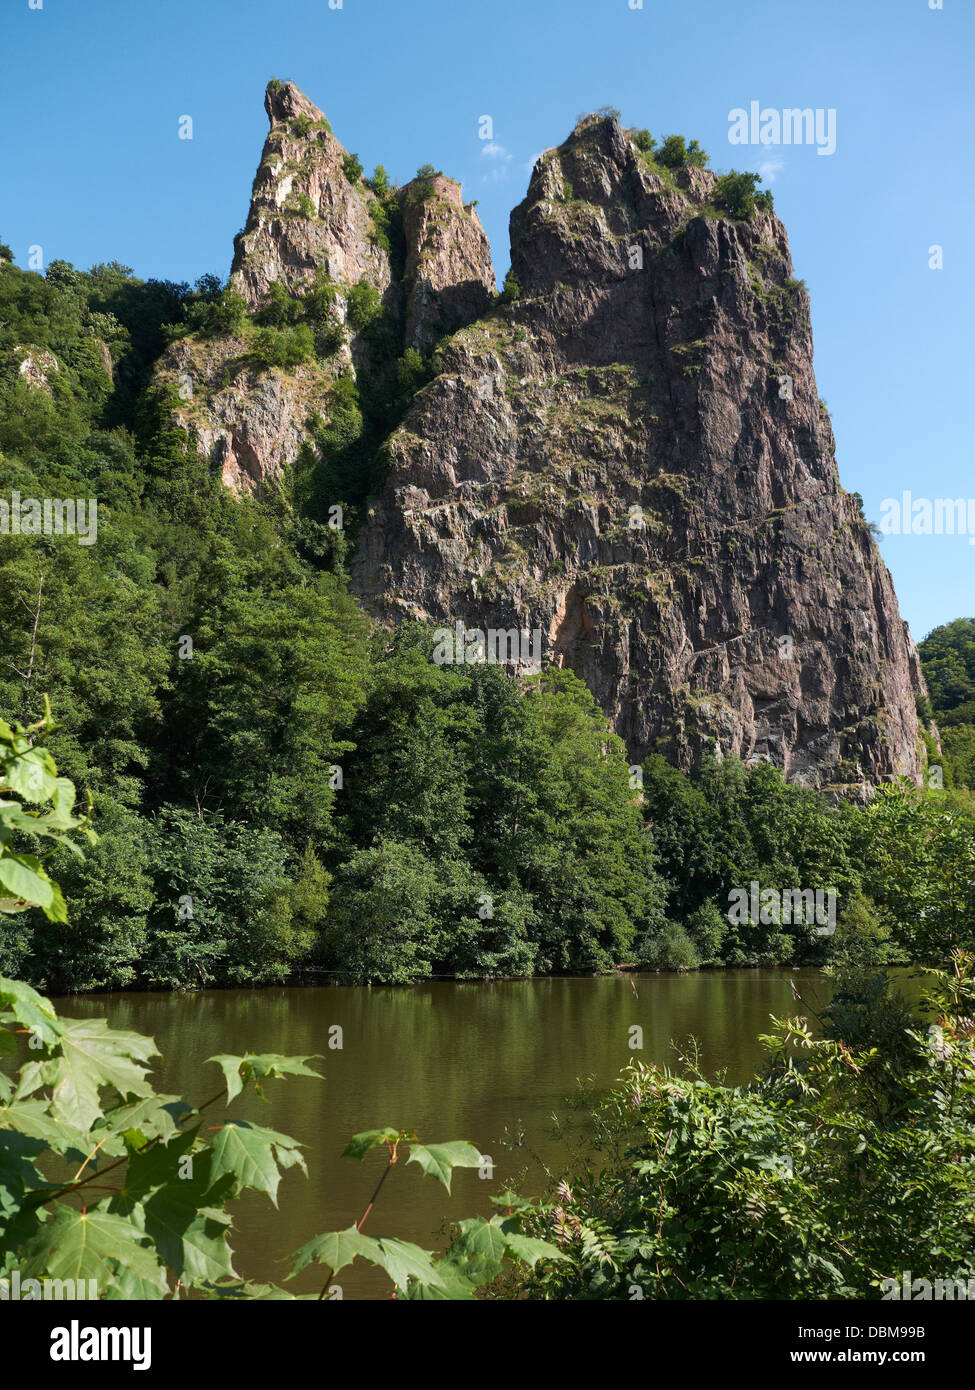 View to the river Nahe and the rock massif Rotenfels, Bad Münster am Stein-Ebernburg, Rheinland-Palatinate,Germany Stock Photo